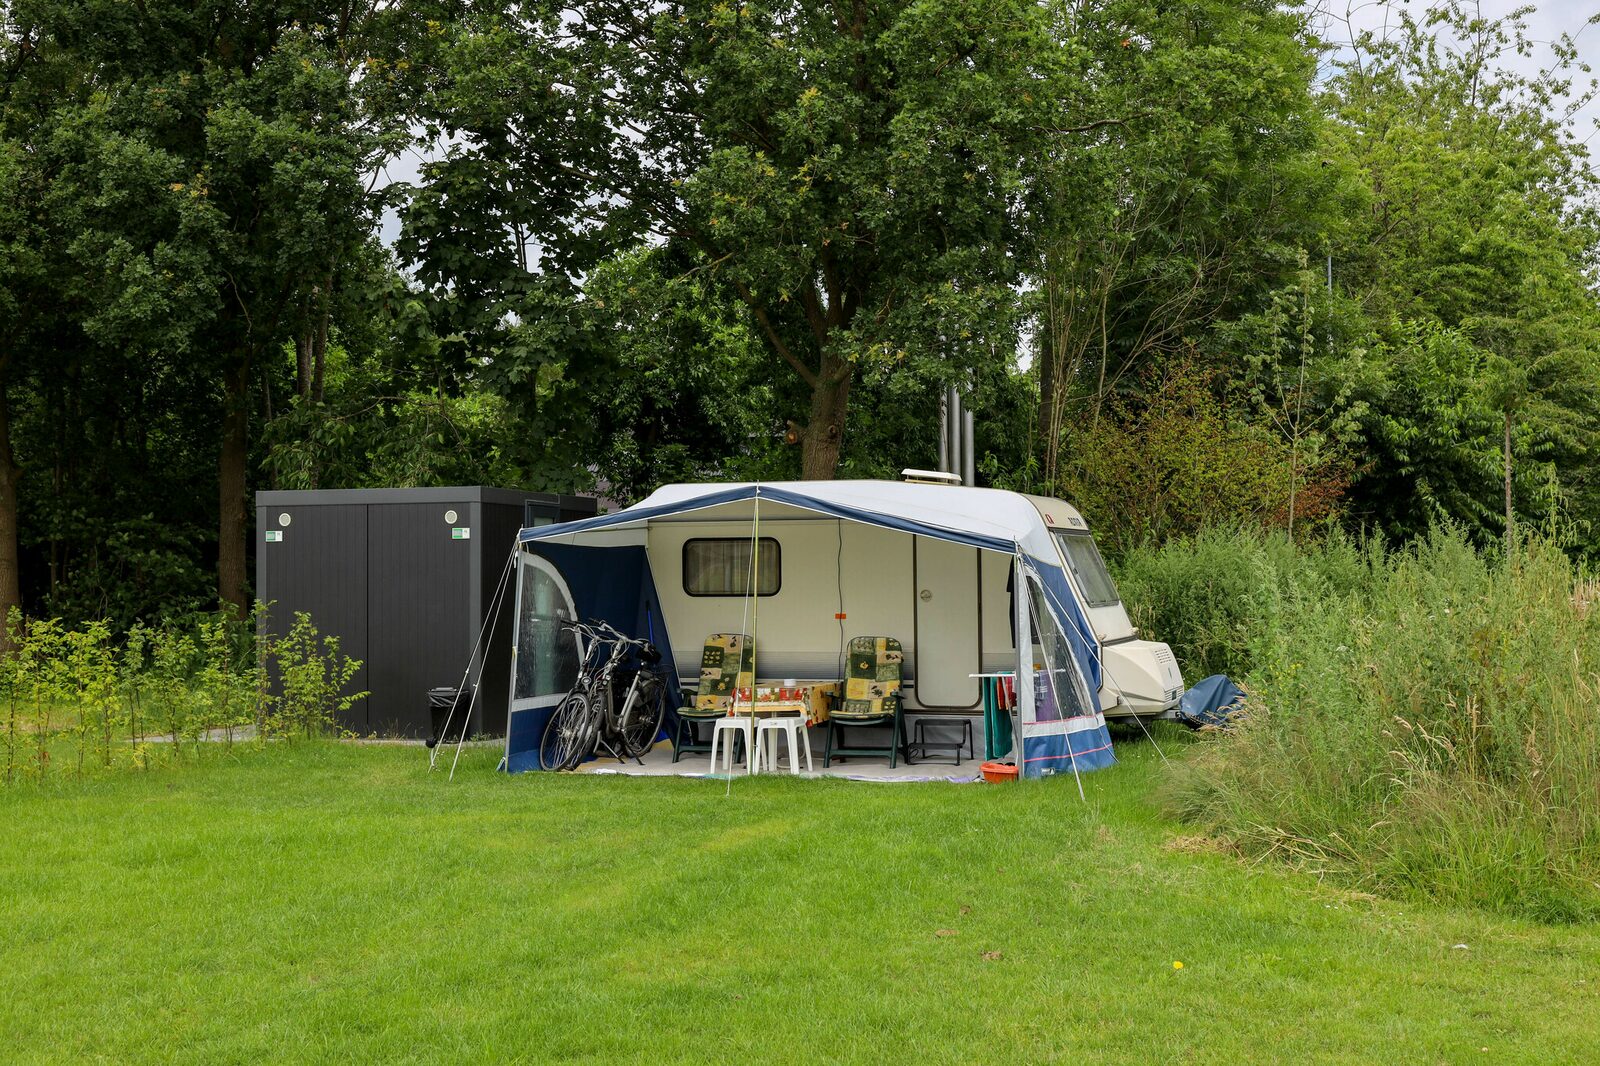 Campsite with private sanitary